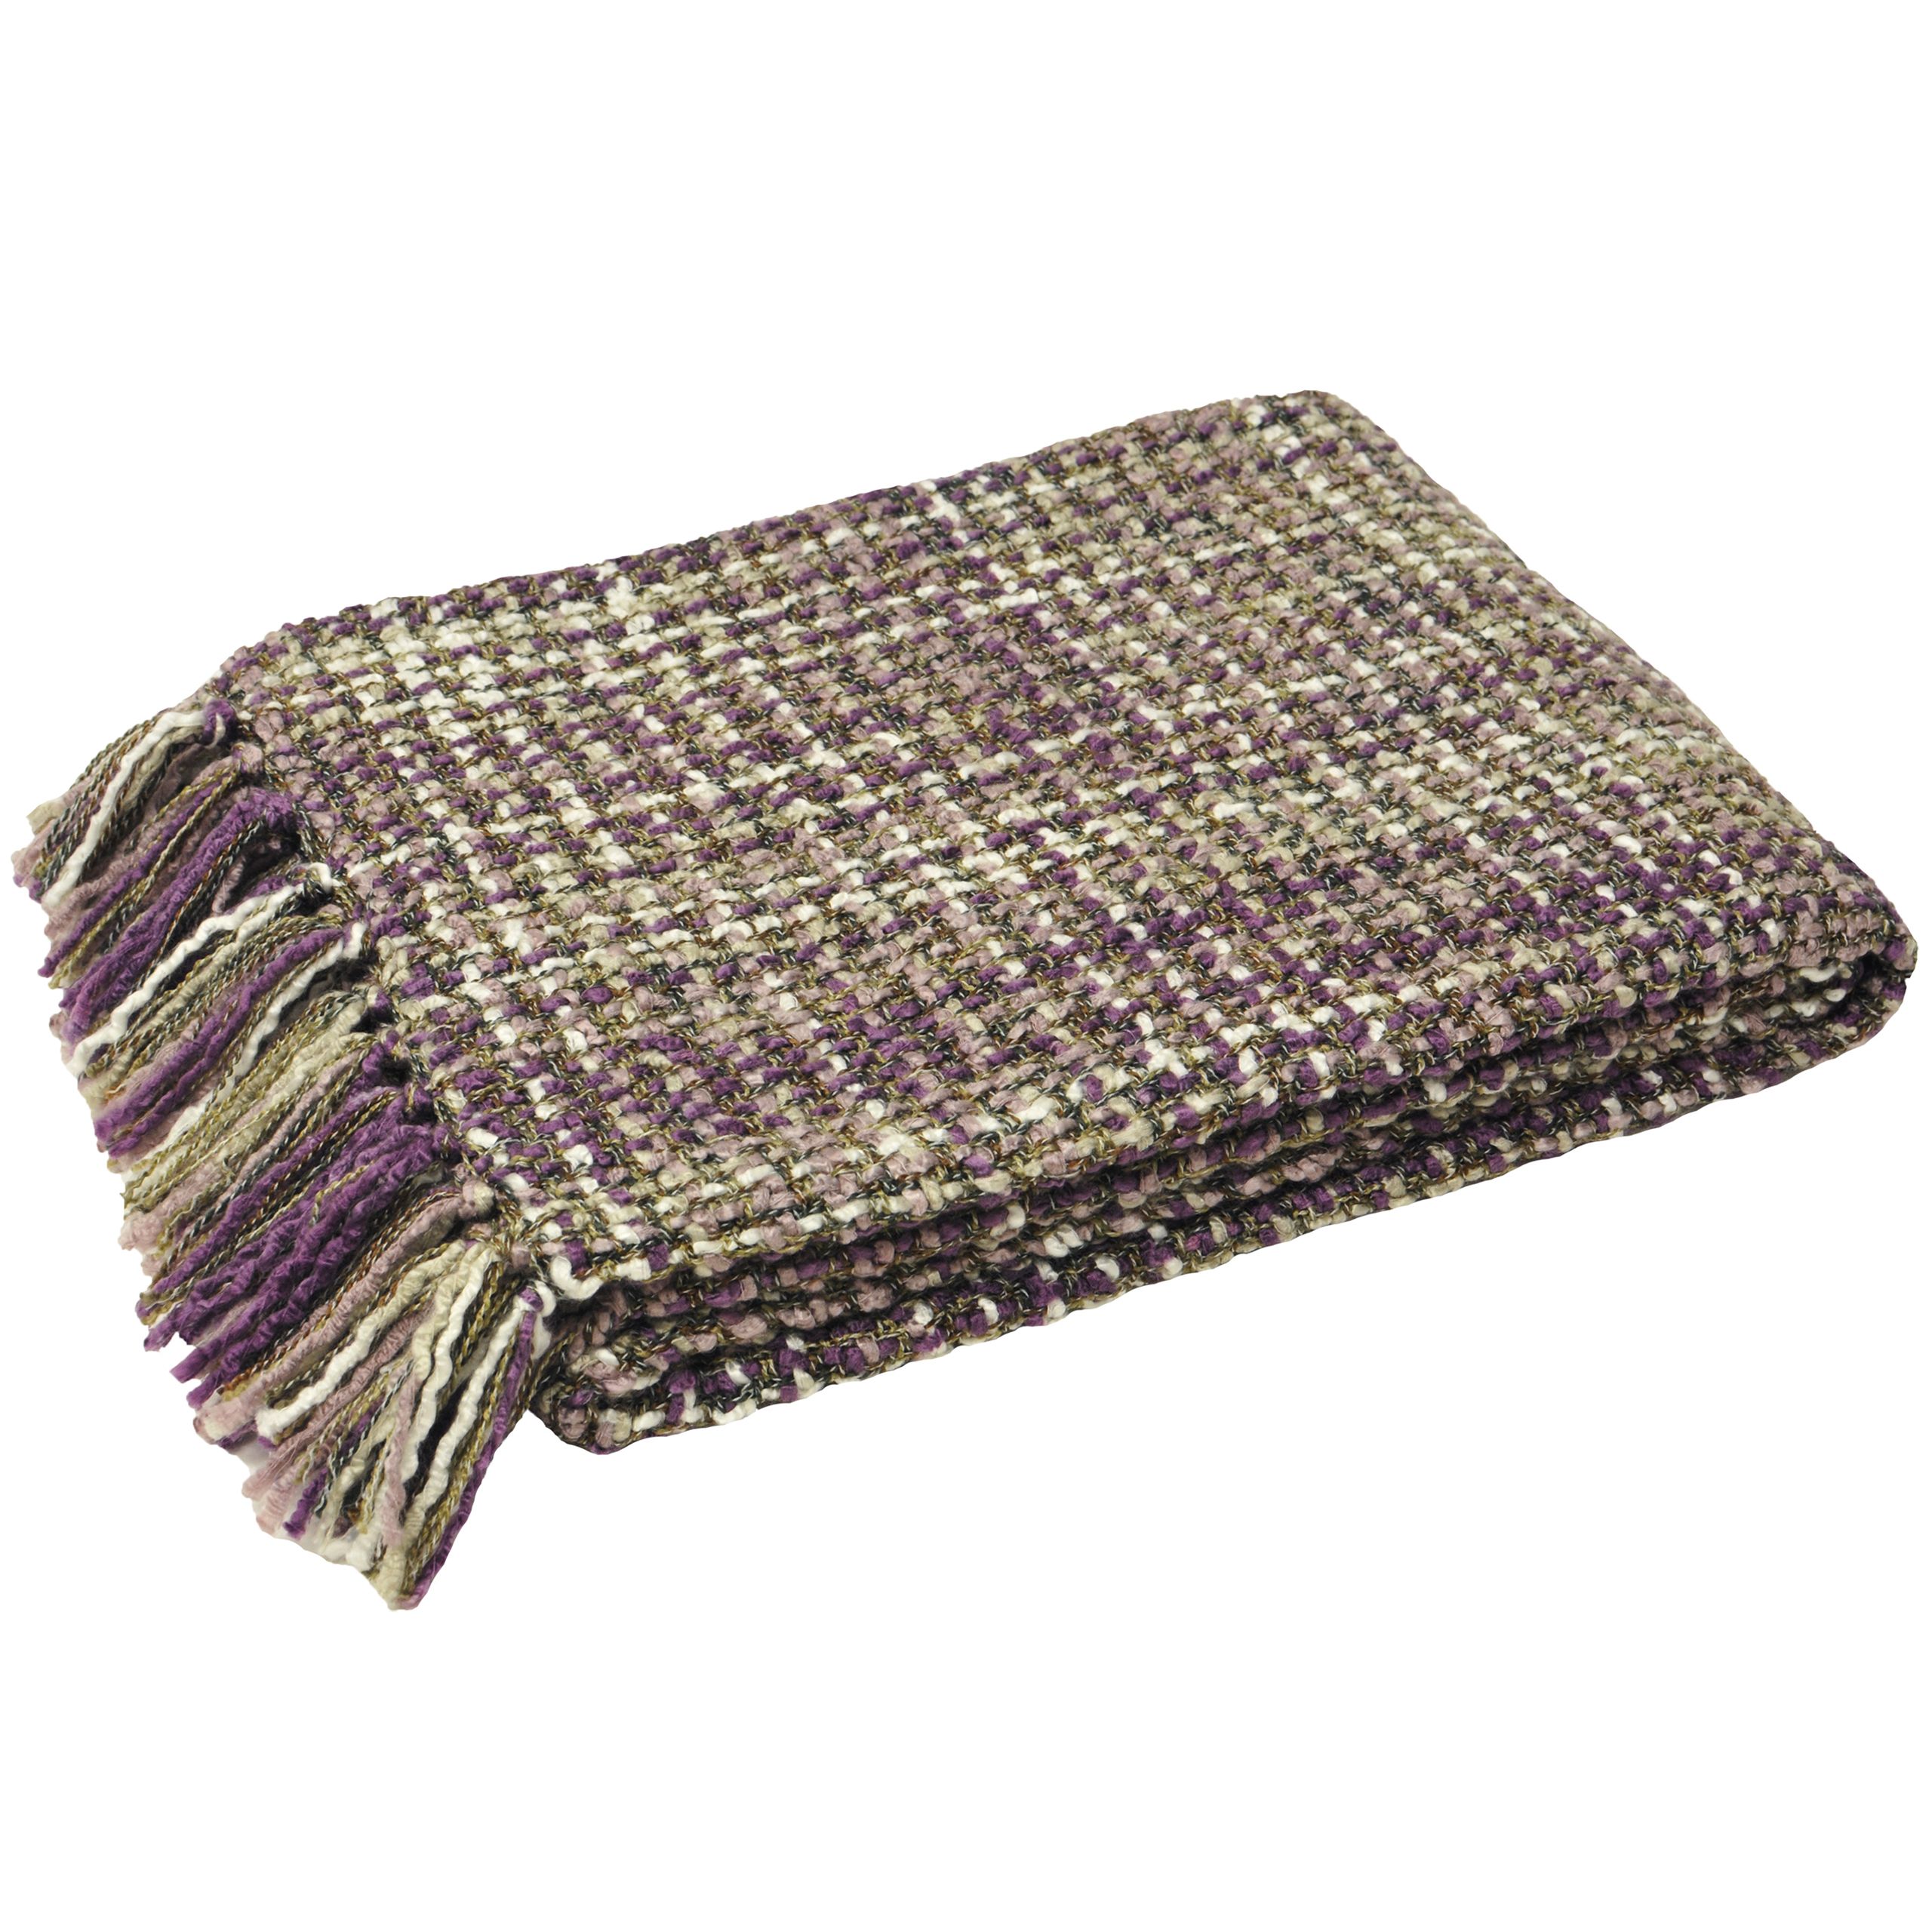 The new baoli woven throw from the paoletti range are the ideal way to bring comfort and style to your home. Featuring a contemporary weave design, this throw has been manufactured to the highest quality and is made from an acrylic, polyester mix. This distinctive and contemporary fringed design will surely add a touch of glamour to your living space and are to snuggle up under on a cold night or to use during summer as a picnic blanket.